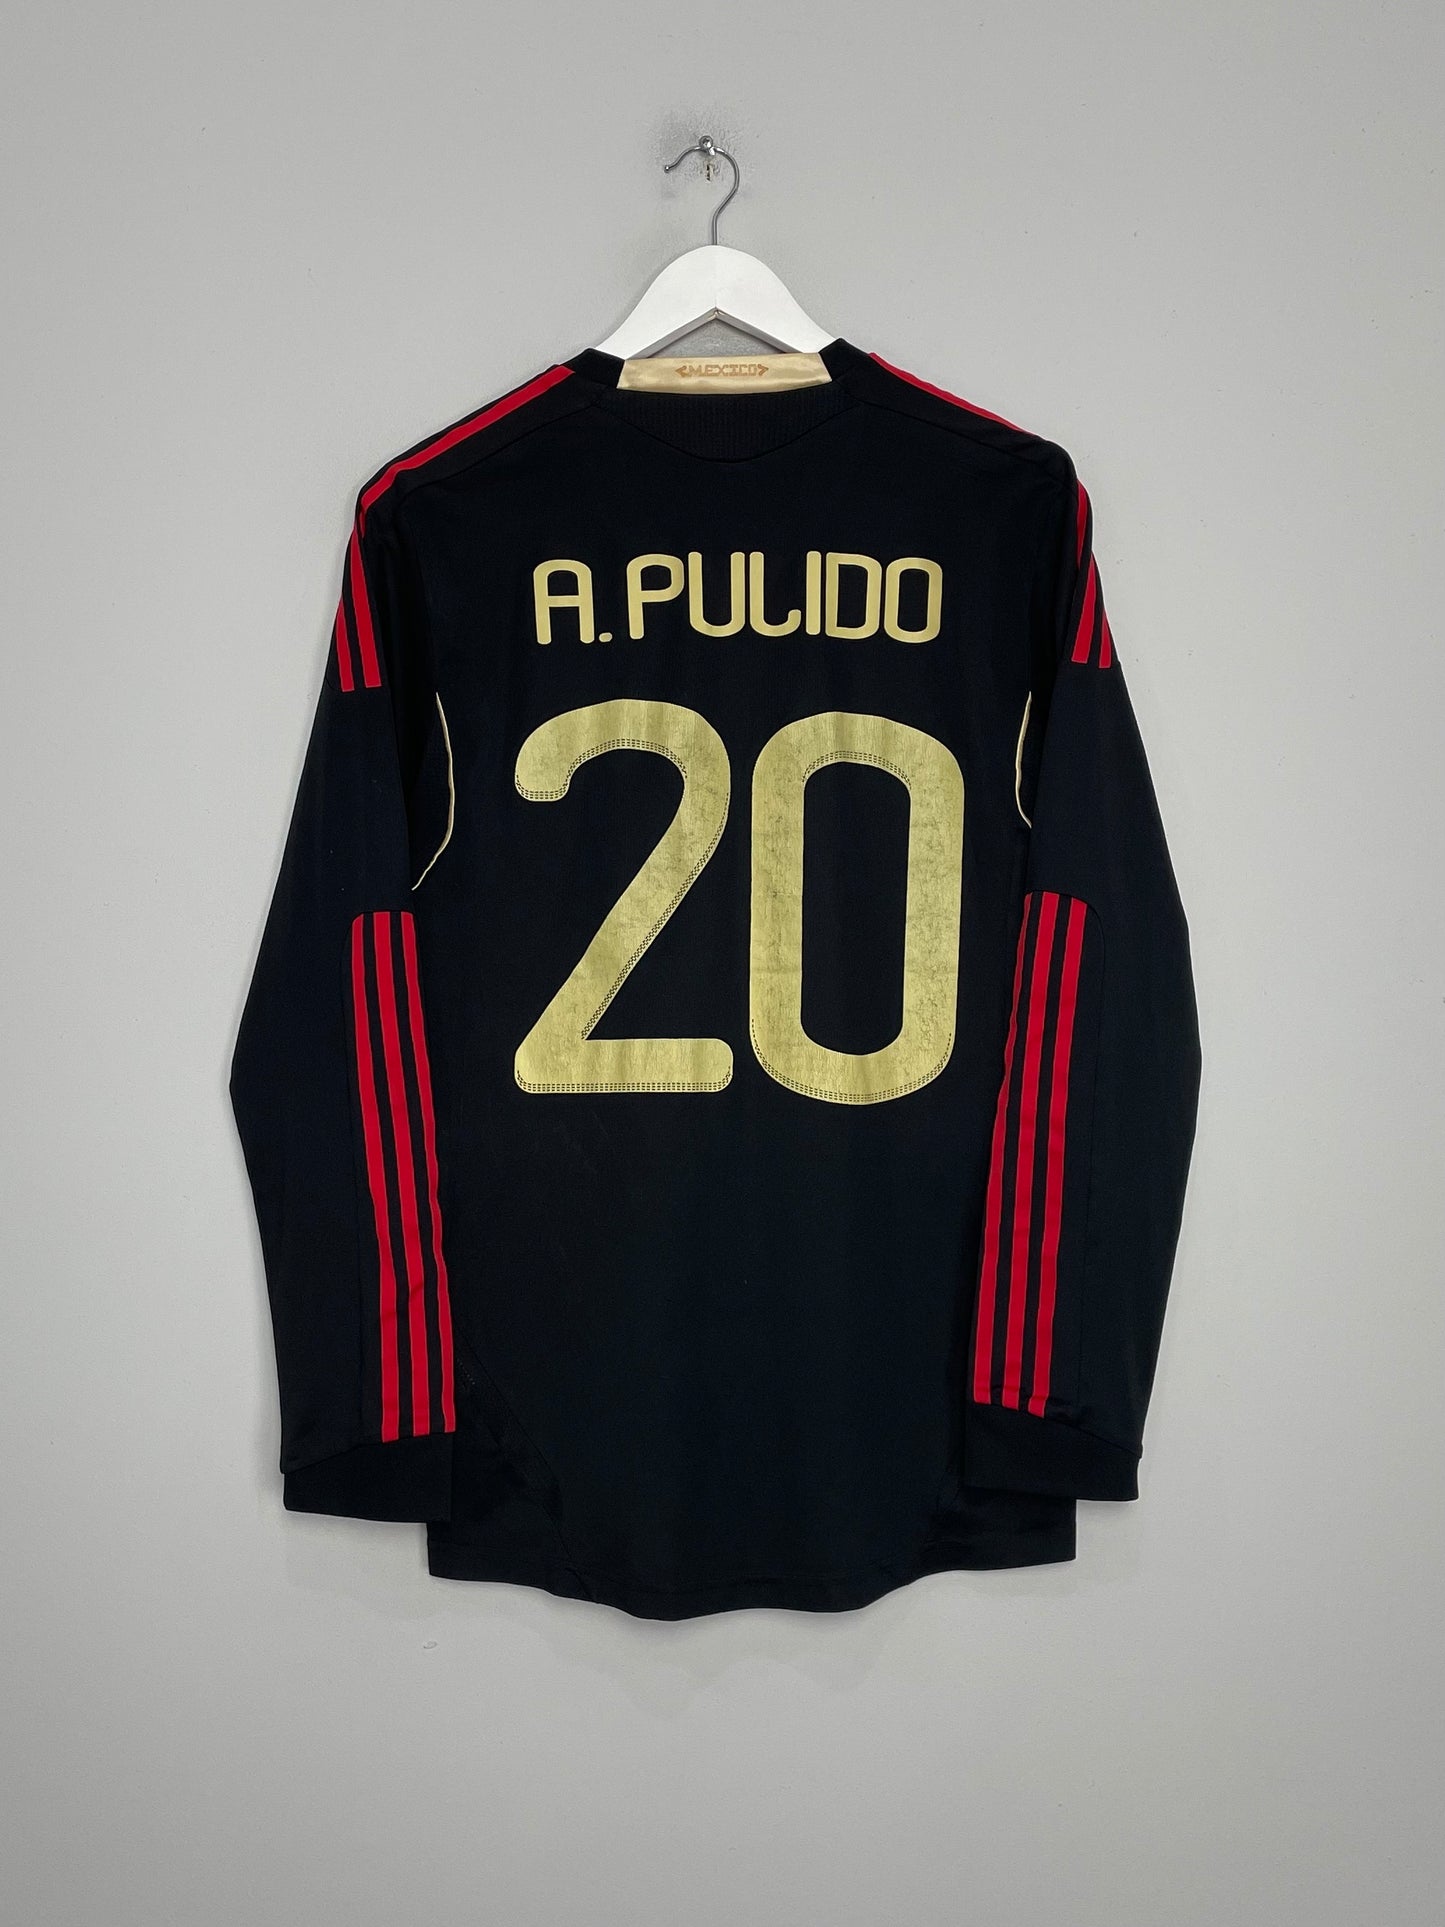 2011/12 MEXICO A.PADILLO #20 L/S *PLAYER ISSUE* AWAY SHIRT (L) ADIDAS